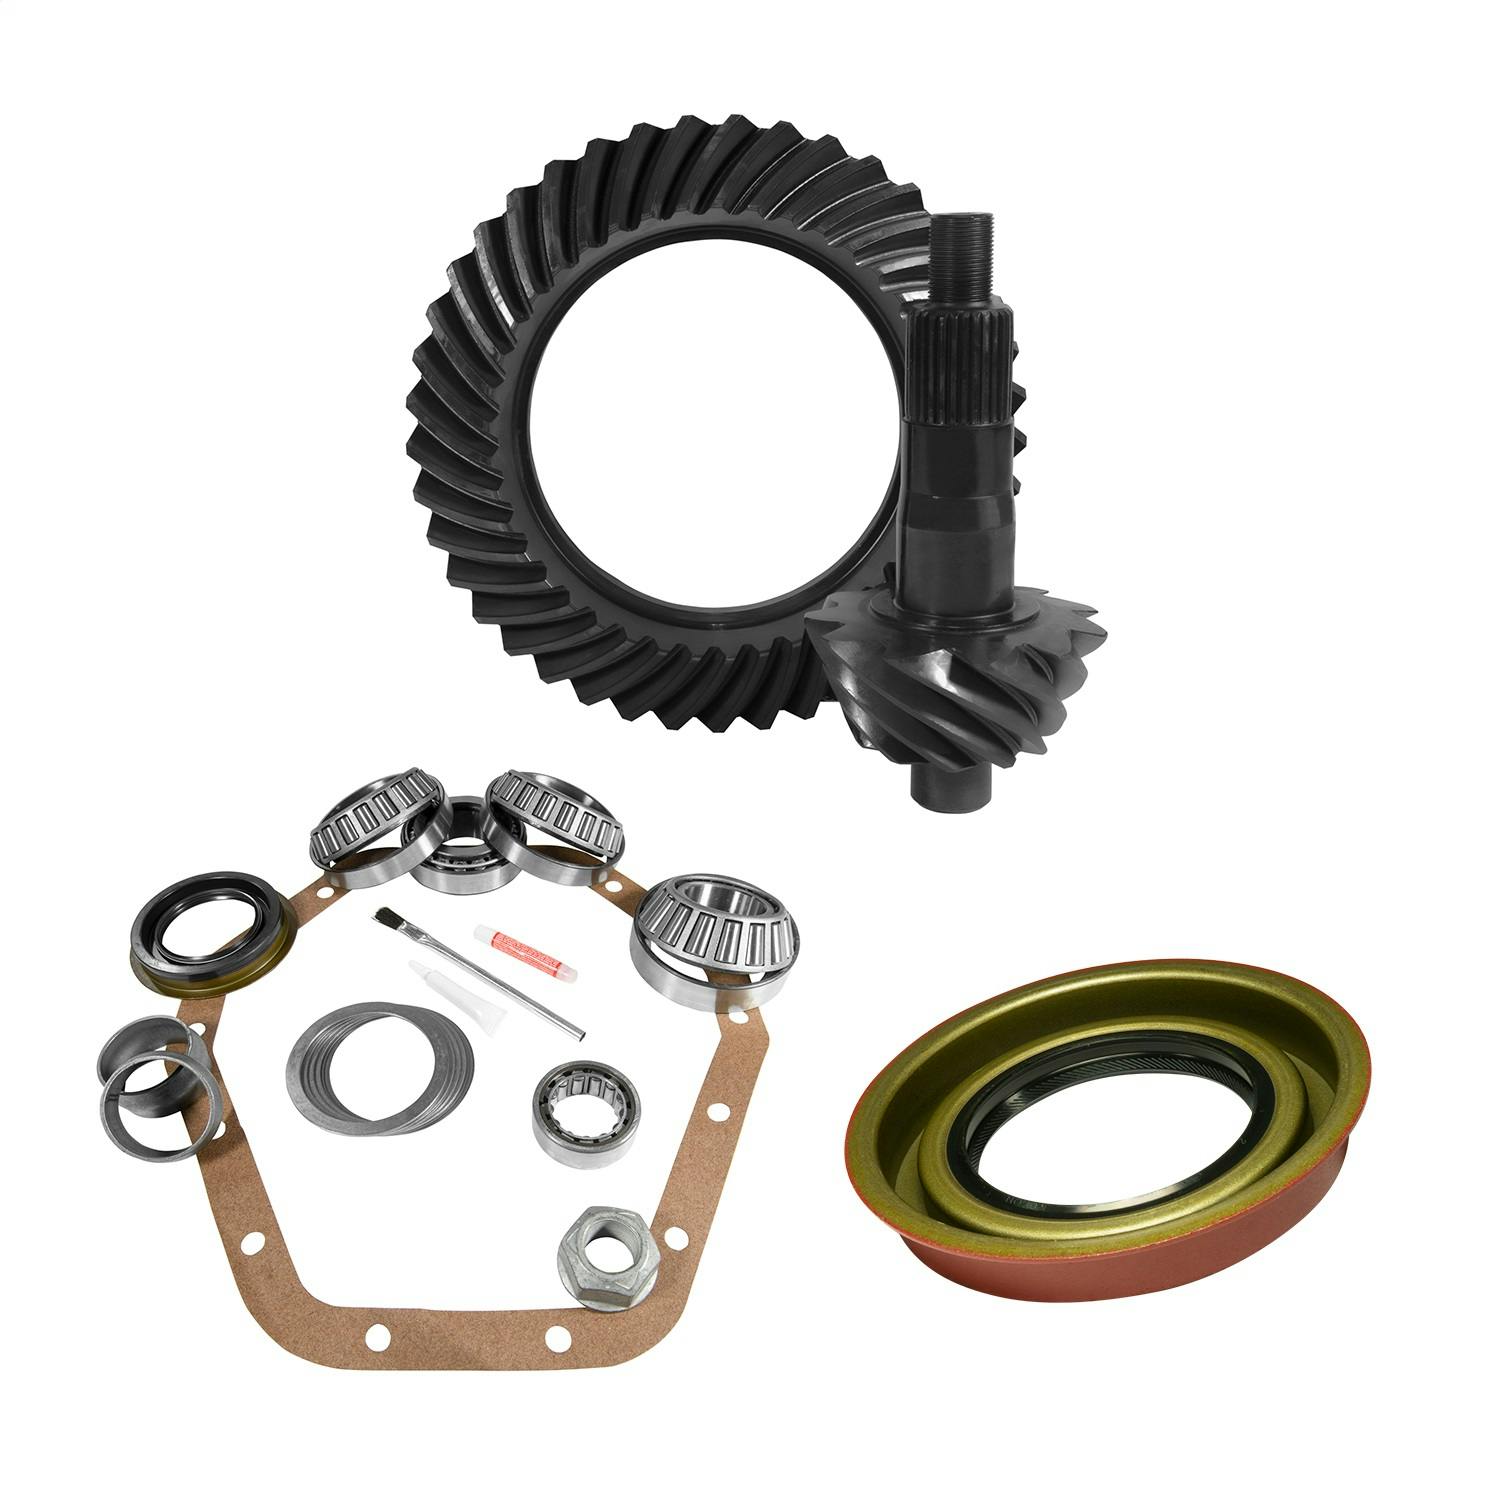 USA Standard Gear ZGK2124 10.5in. GM 14 Bolt 5.38 Thick Rear Ring/Pinion and Install Kit